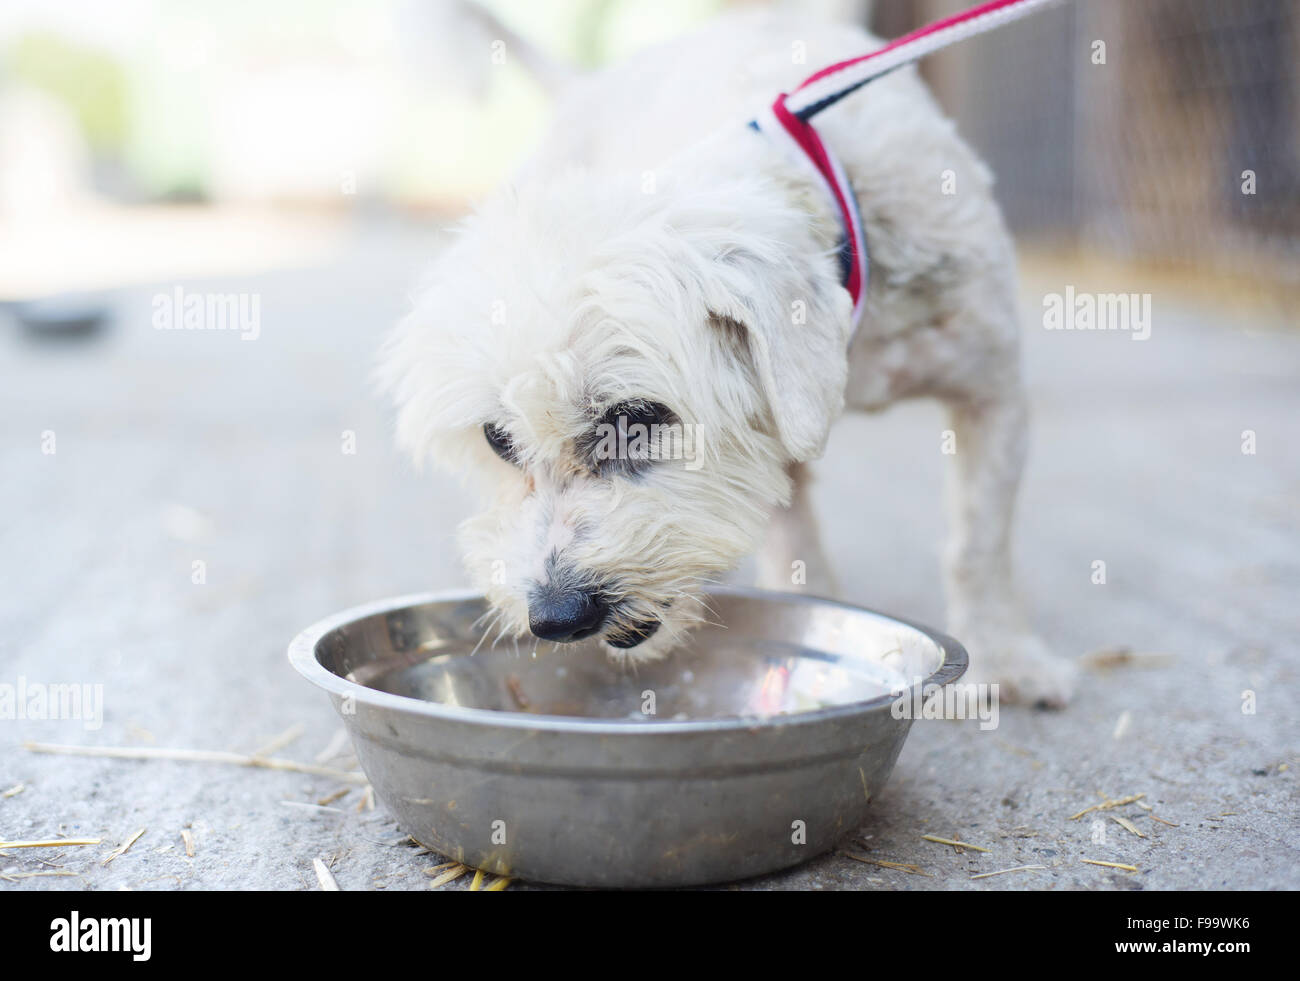 Cute dog outside eating his food from the bowl Stock Photo